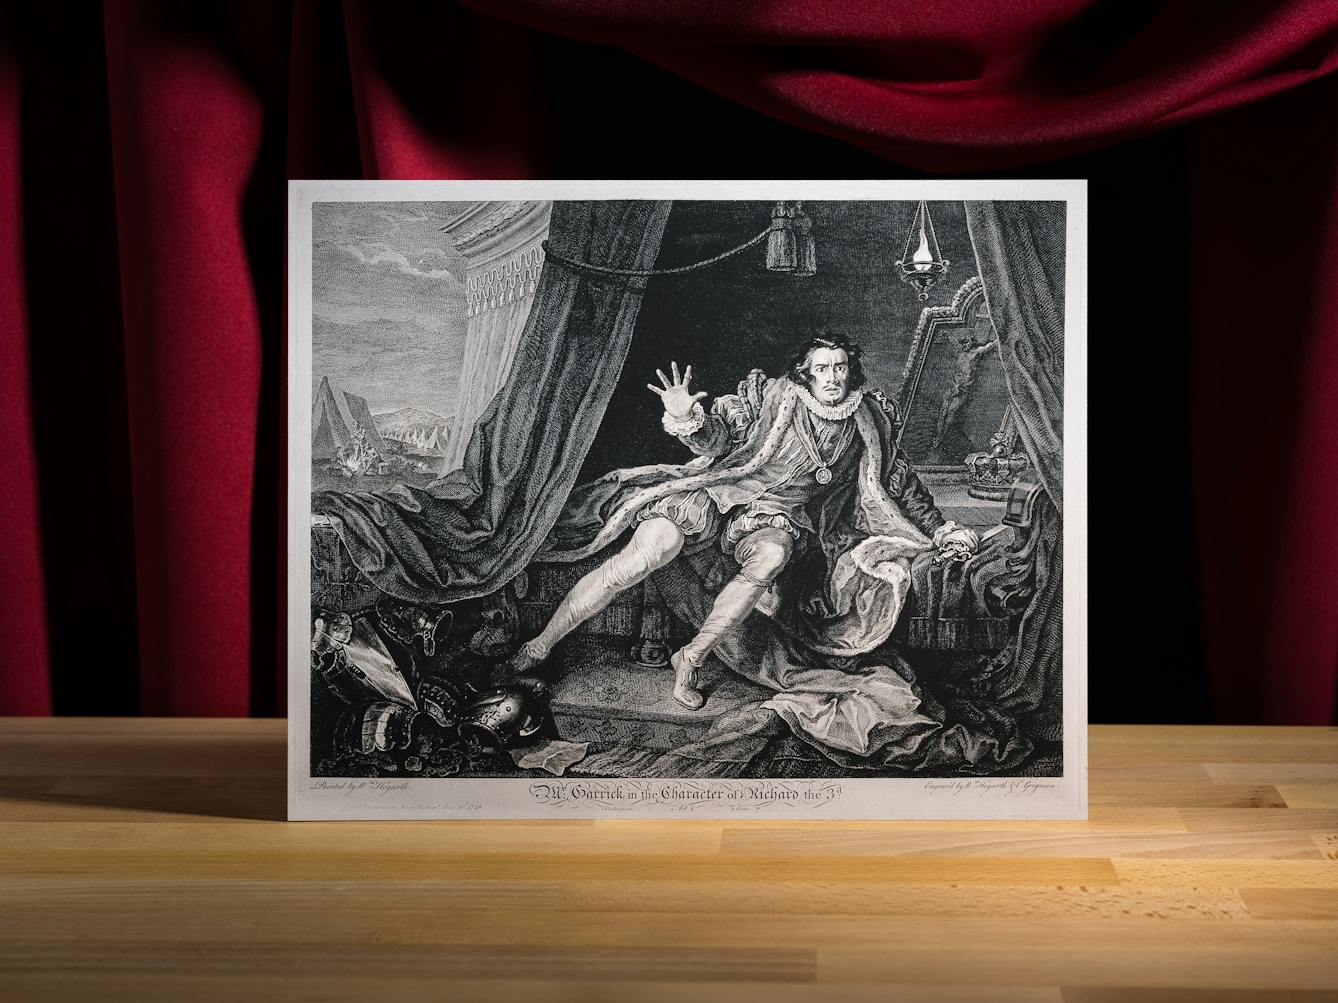 Black and white etching with engraving showing David Garrick in the role of Richard III, awakening from his nightmare in the tent with military activities in the background. His hand is raised a his fingers are splayed outwards. He has an expression of bewilderment. 